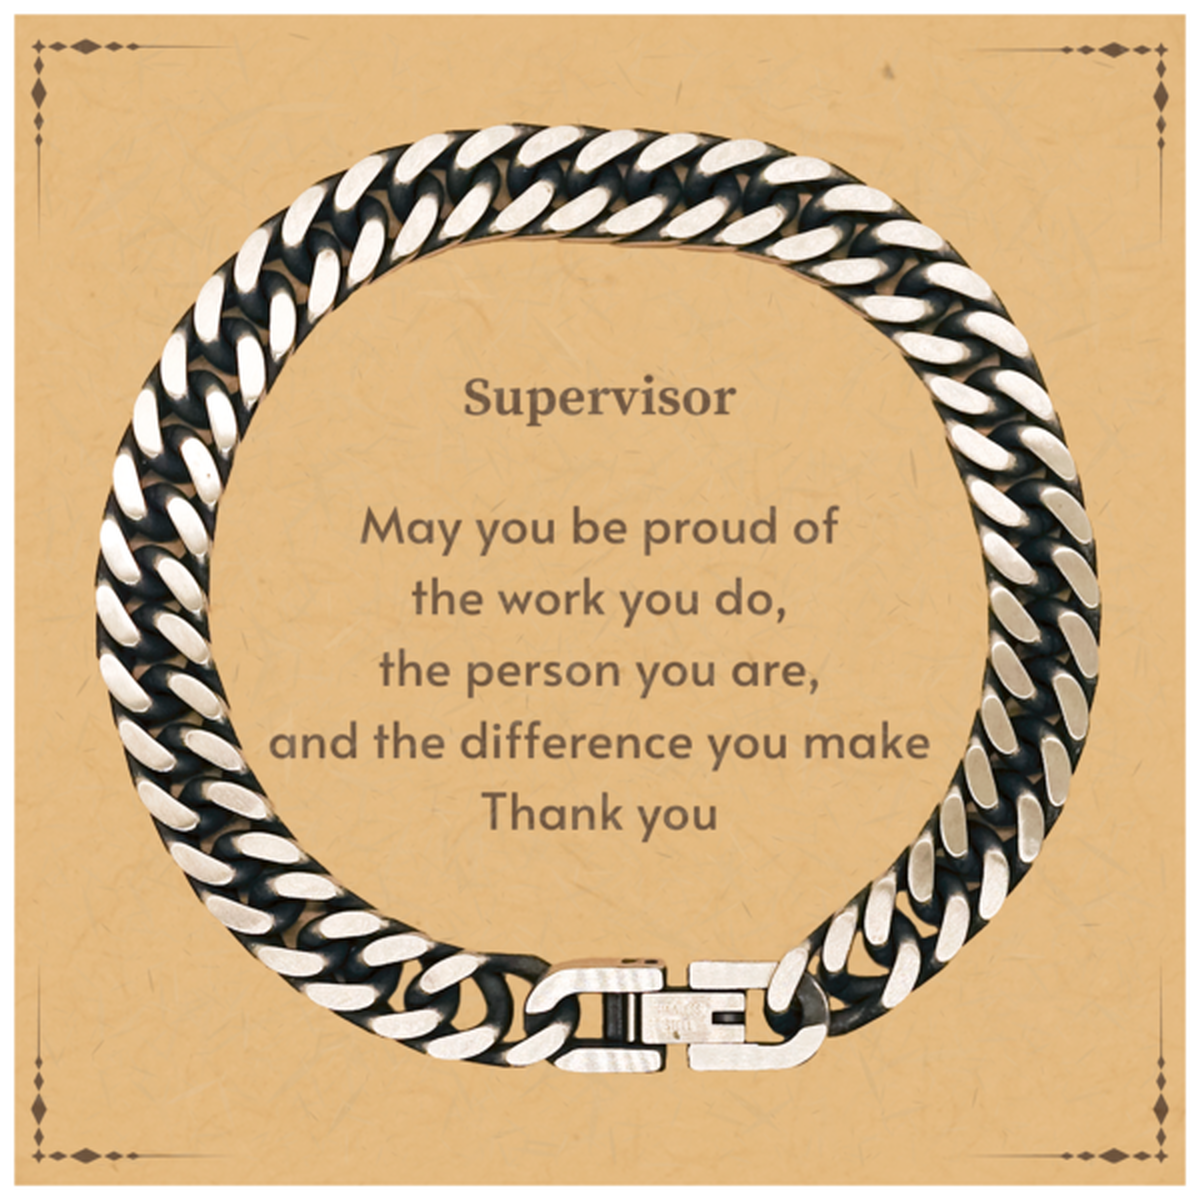 Heartwarming Cuban Link Chain Bracelet Retirement Coworkers Gifts for Supervisor, Supervisor May You be proud of the work you do, the person you are Gifts for Boss Men Women Friends